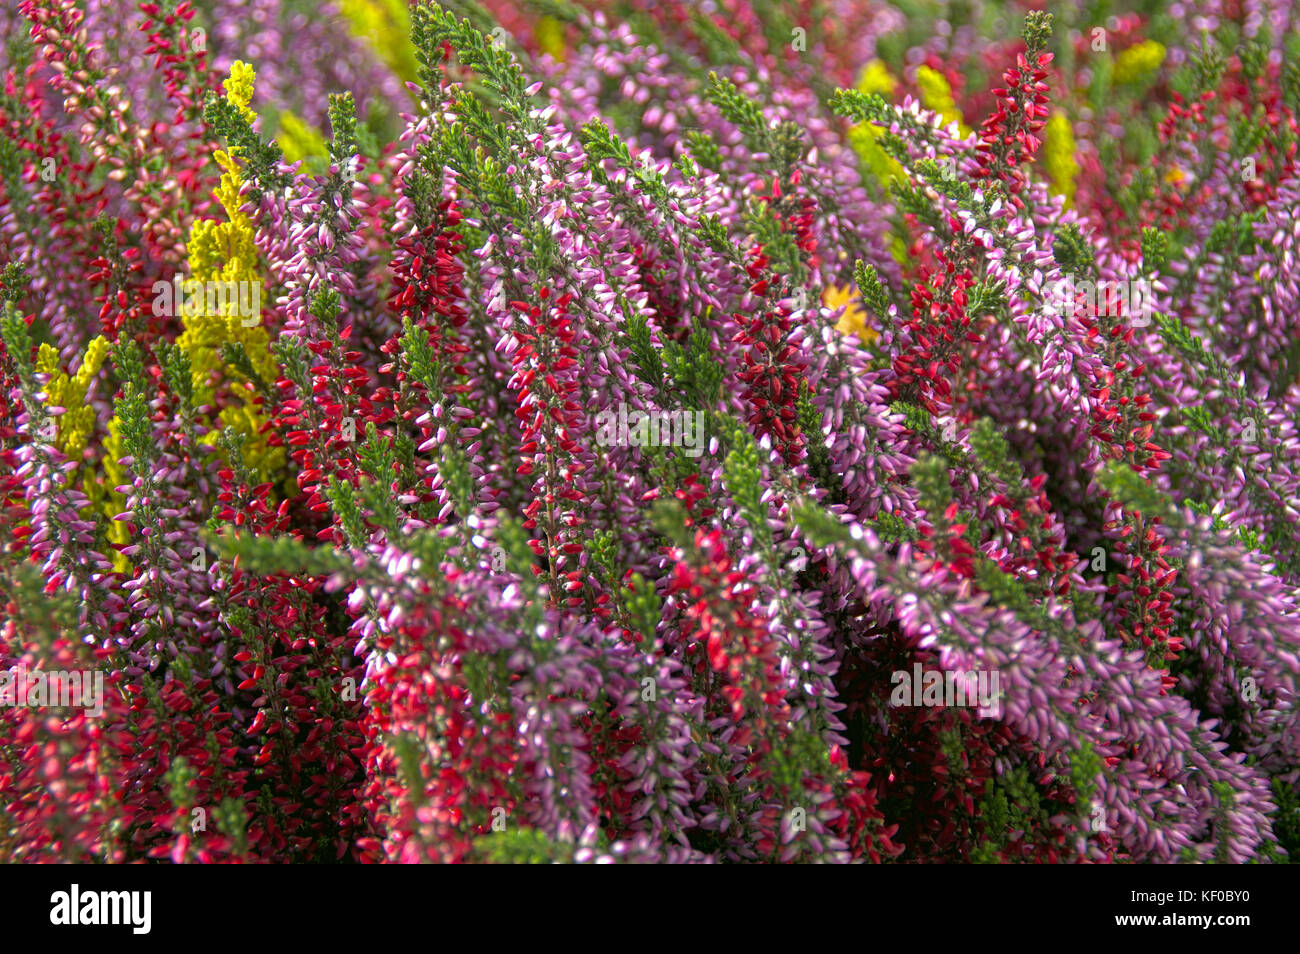 A colorful composition of heather flowers. Typical of autumn plants blooming. Stock Photo